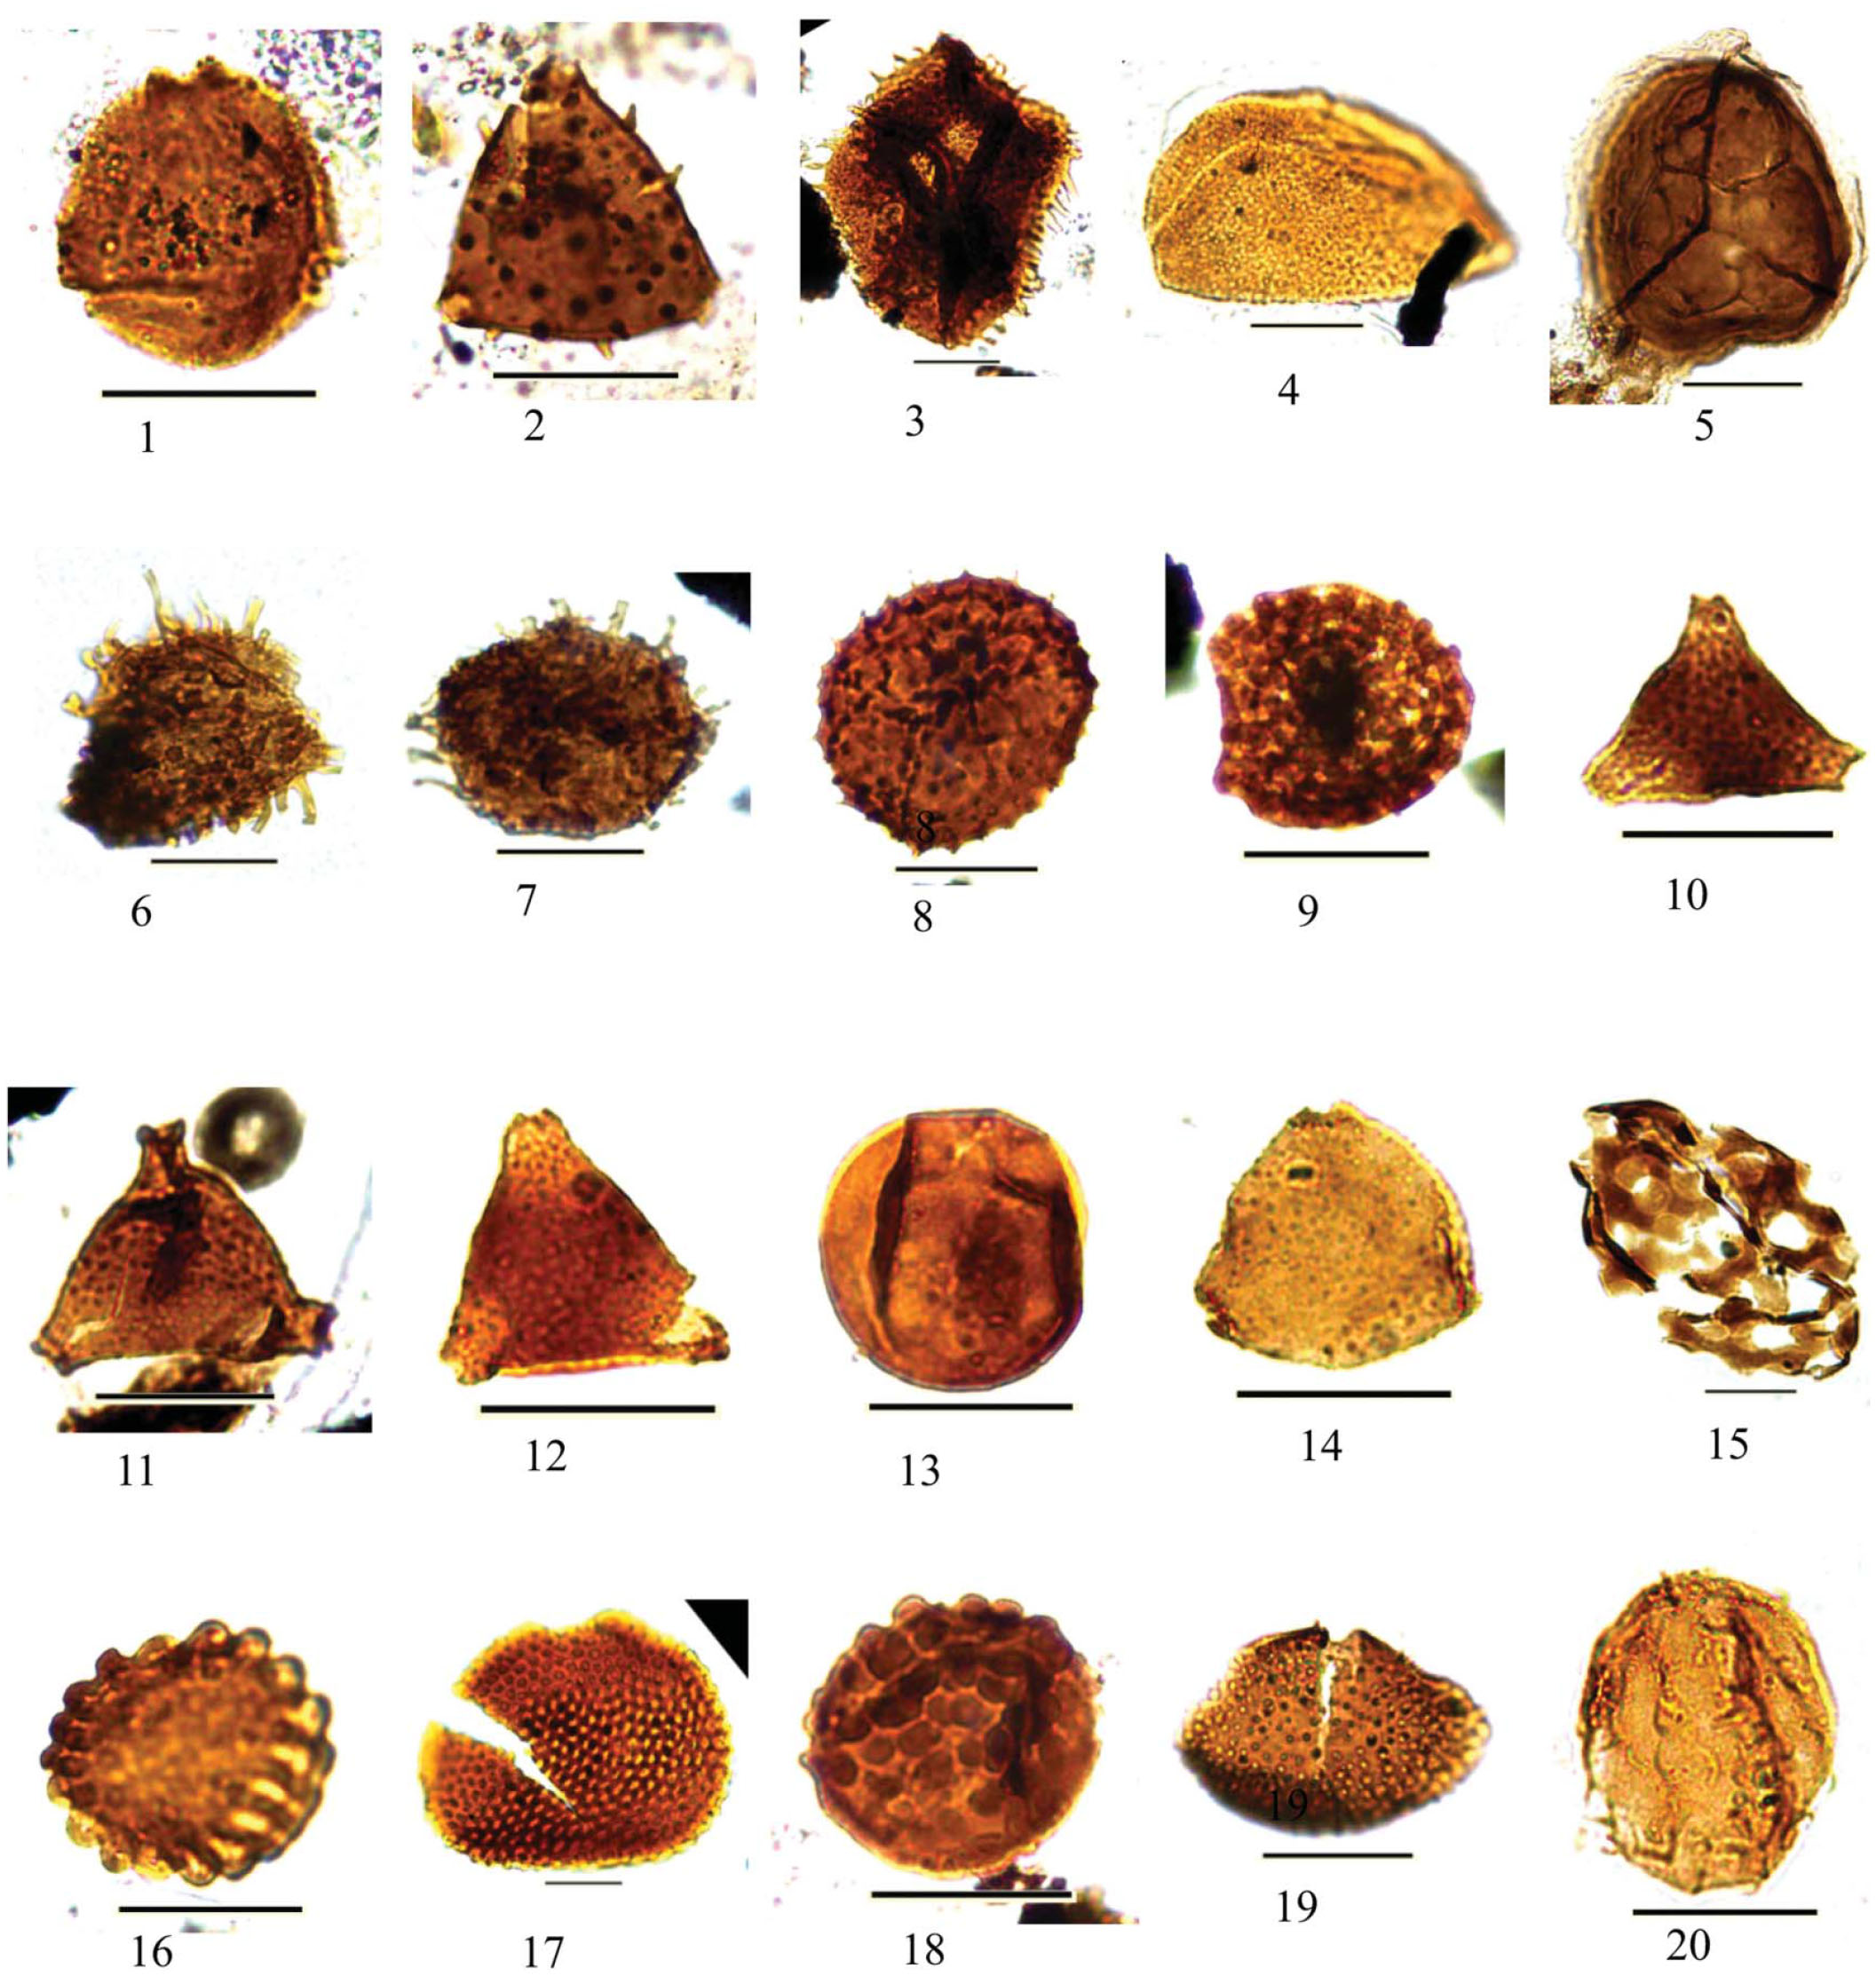 Late Cretaceous Spore Pollen Zonation Of The Central African Rift